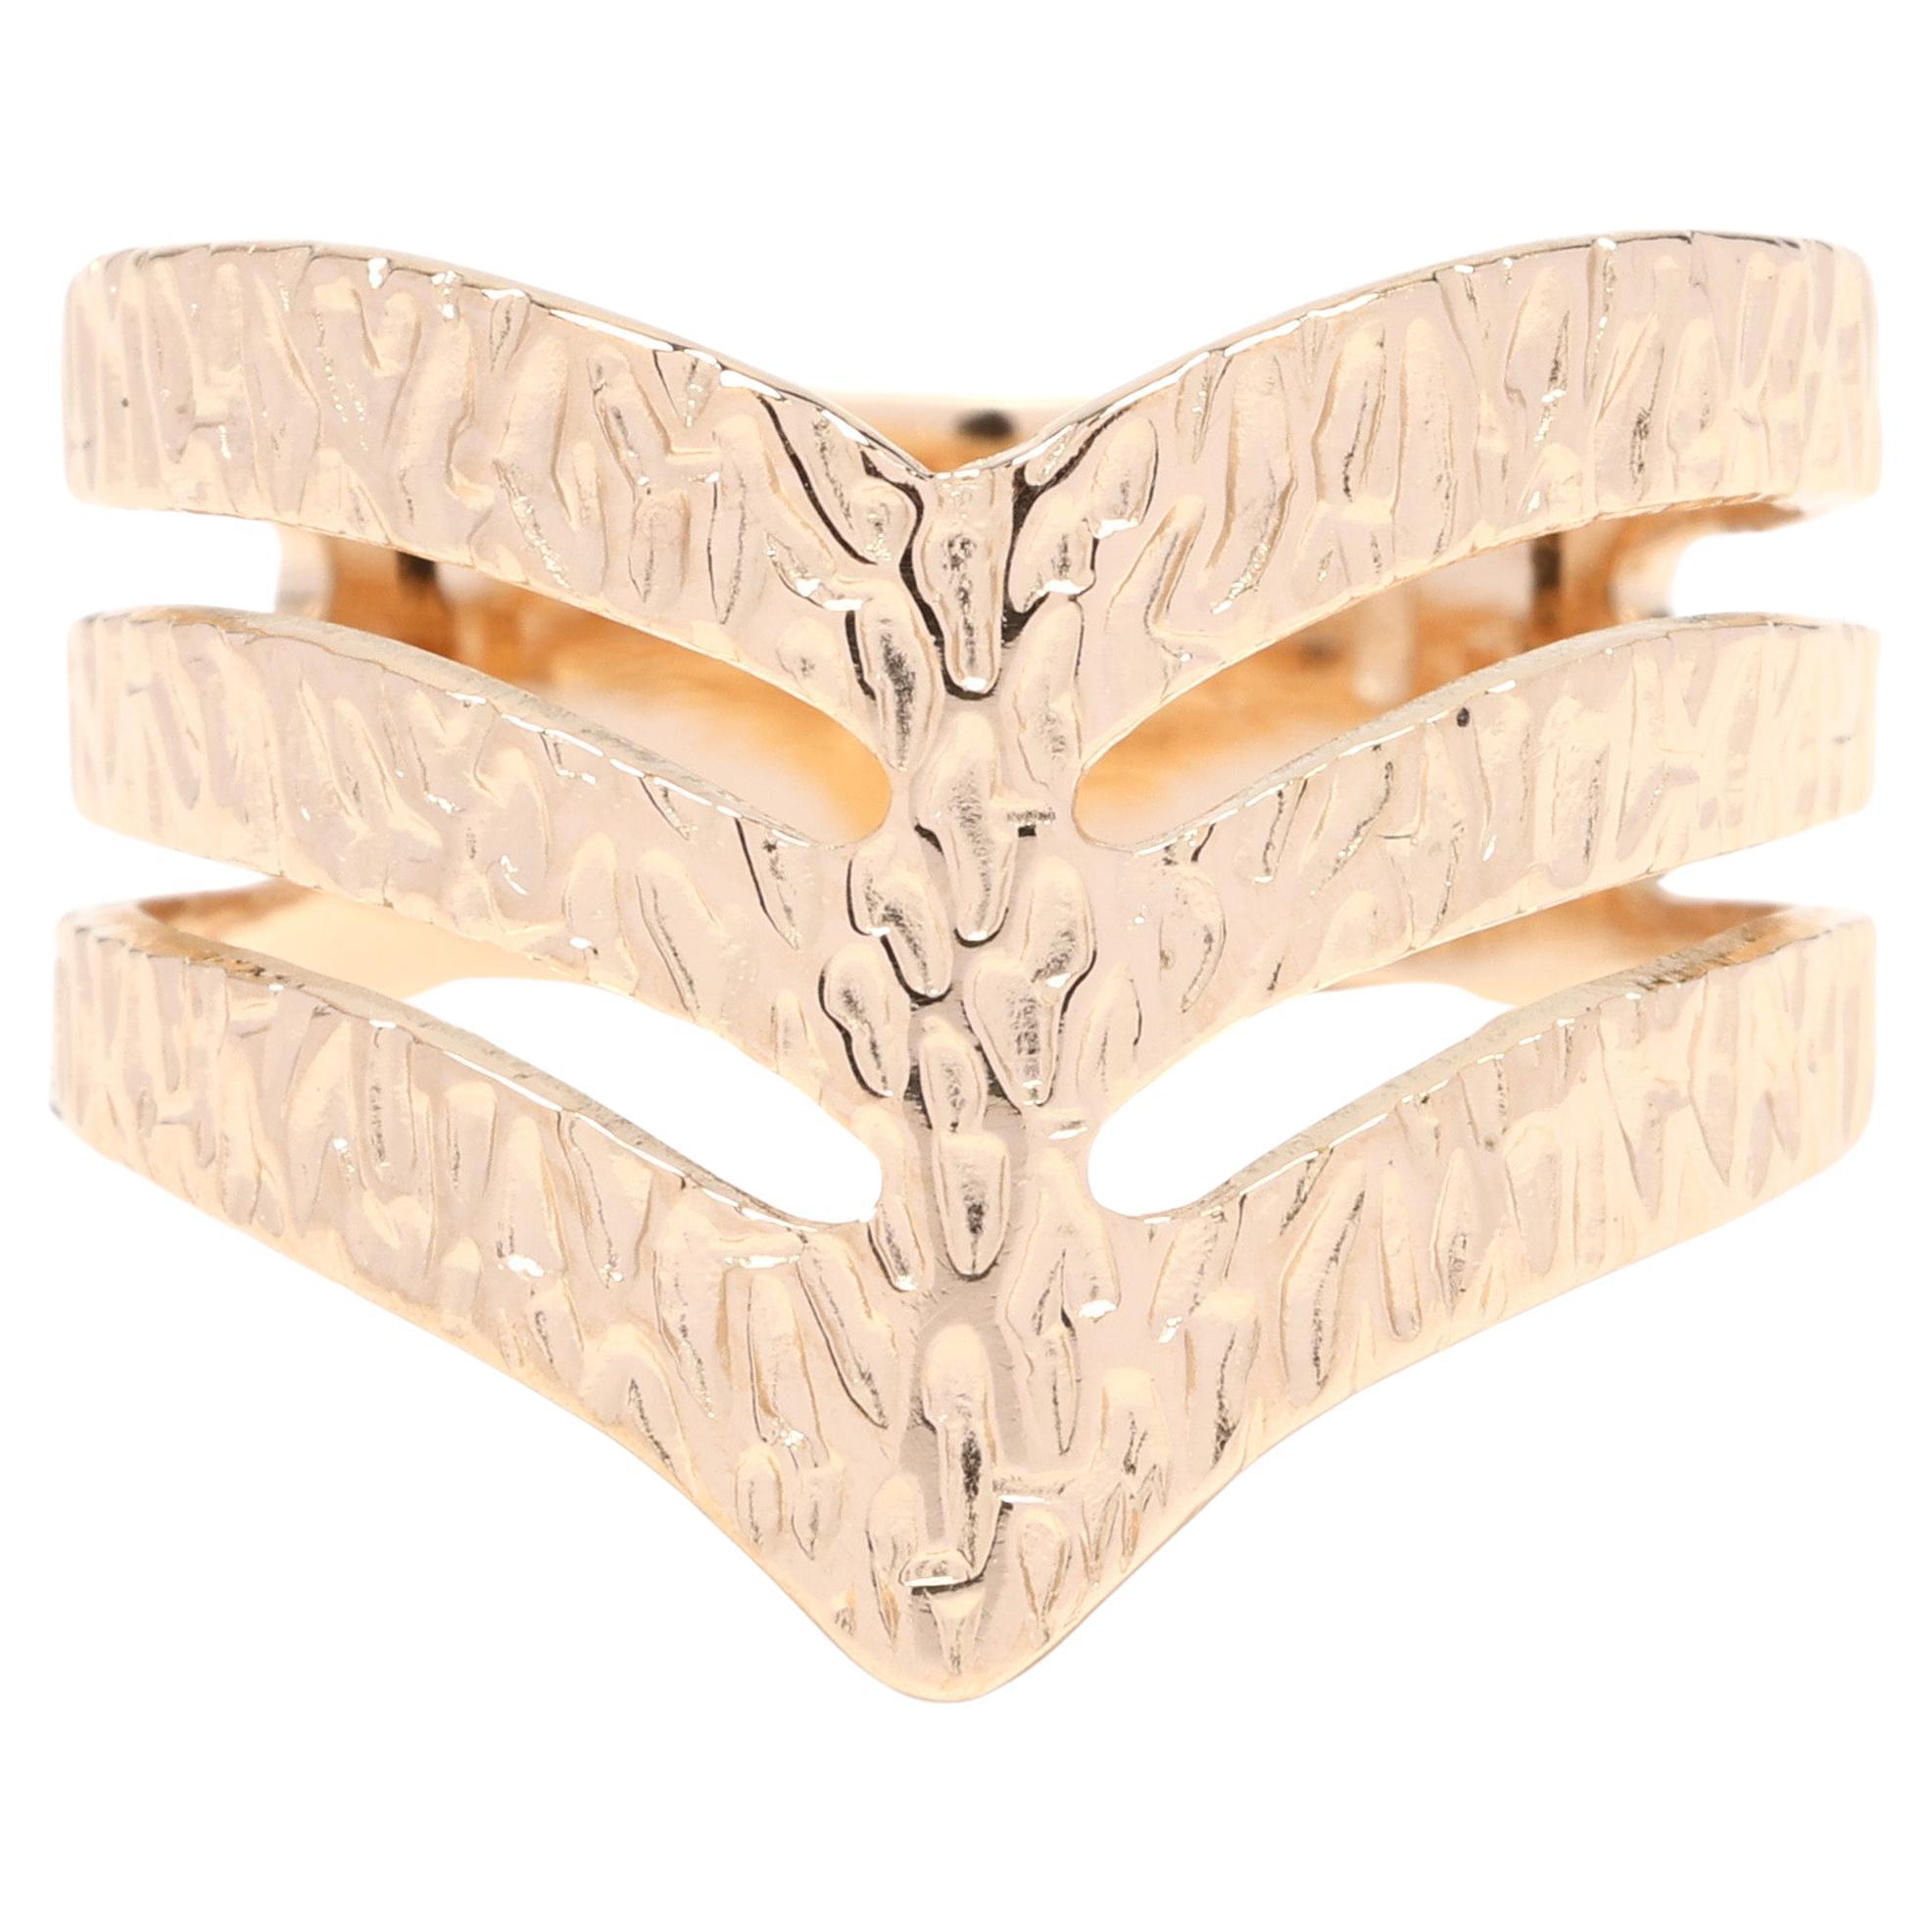 Thick Patterned Band Ring, 18k Yellow Gold, Ring Size 6.25, Textured Ring For Sale